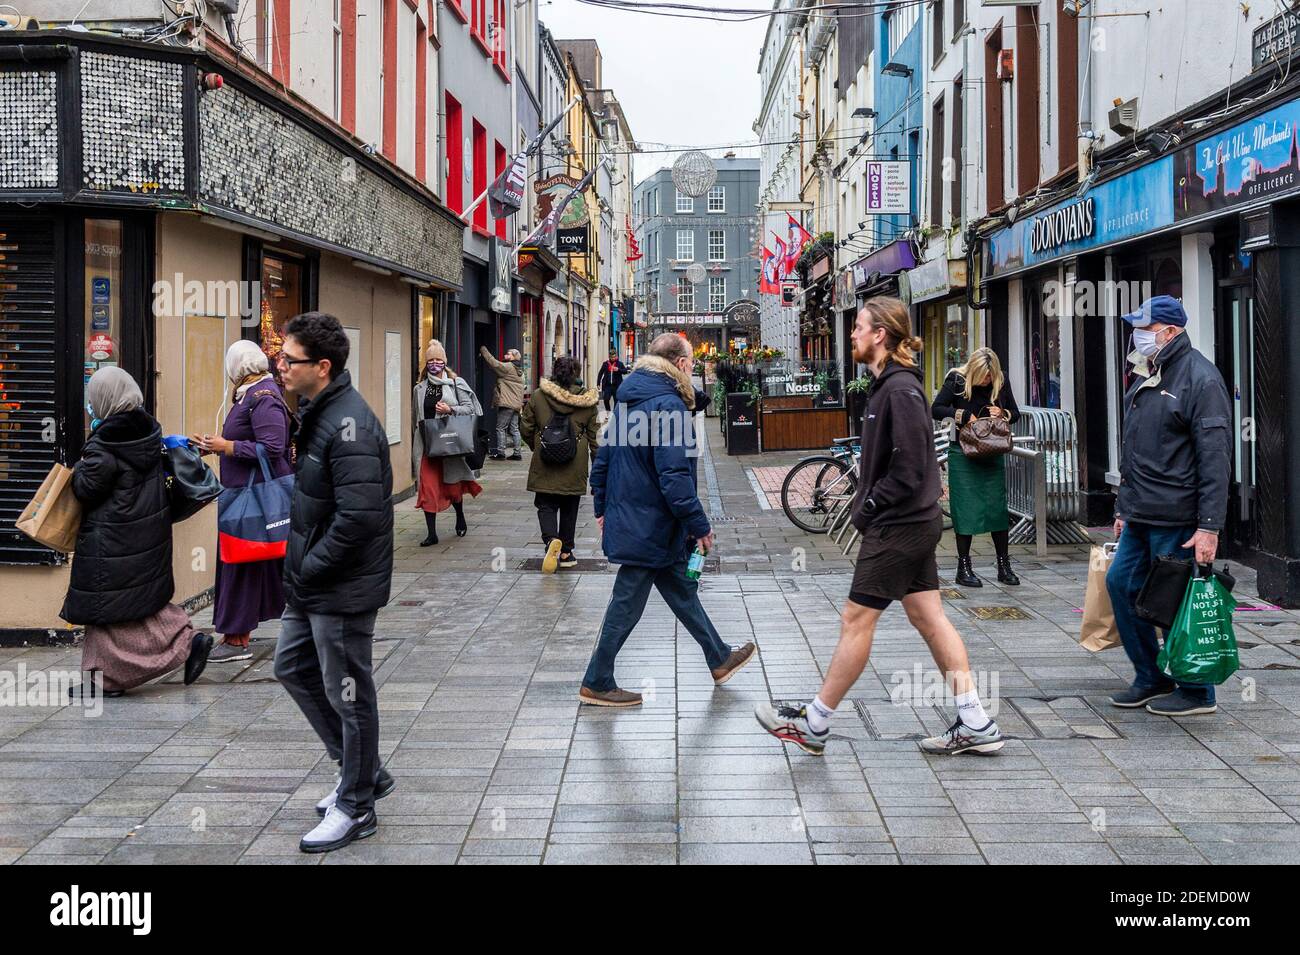 Cork, Ireland. 1st Dec, 2020. Non-essential shops are opening around the country this morning after being closed for six weeks due to Level 5 COVID-19 restrictions. Cork city was busy with shoppers doing their Christmas shopping this morning. Credit: AG News/Alamy Live News Stock Photo